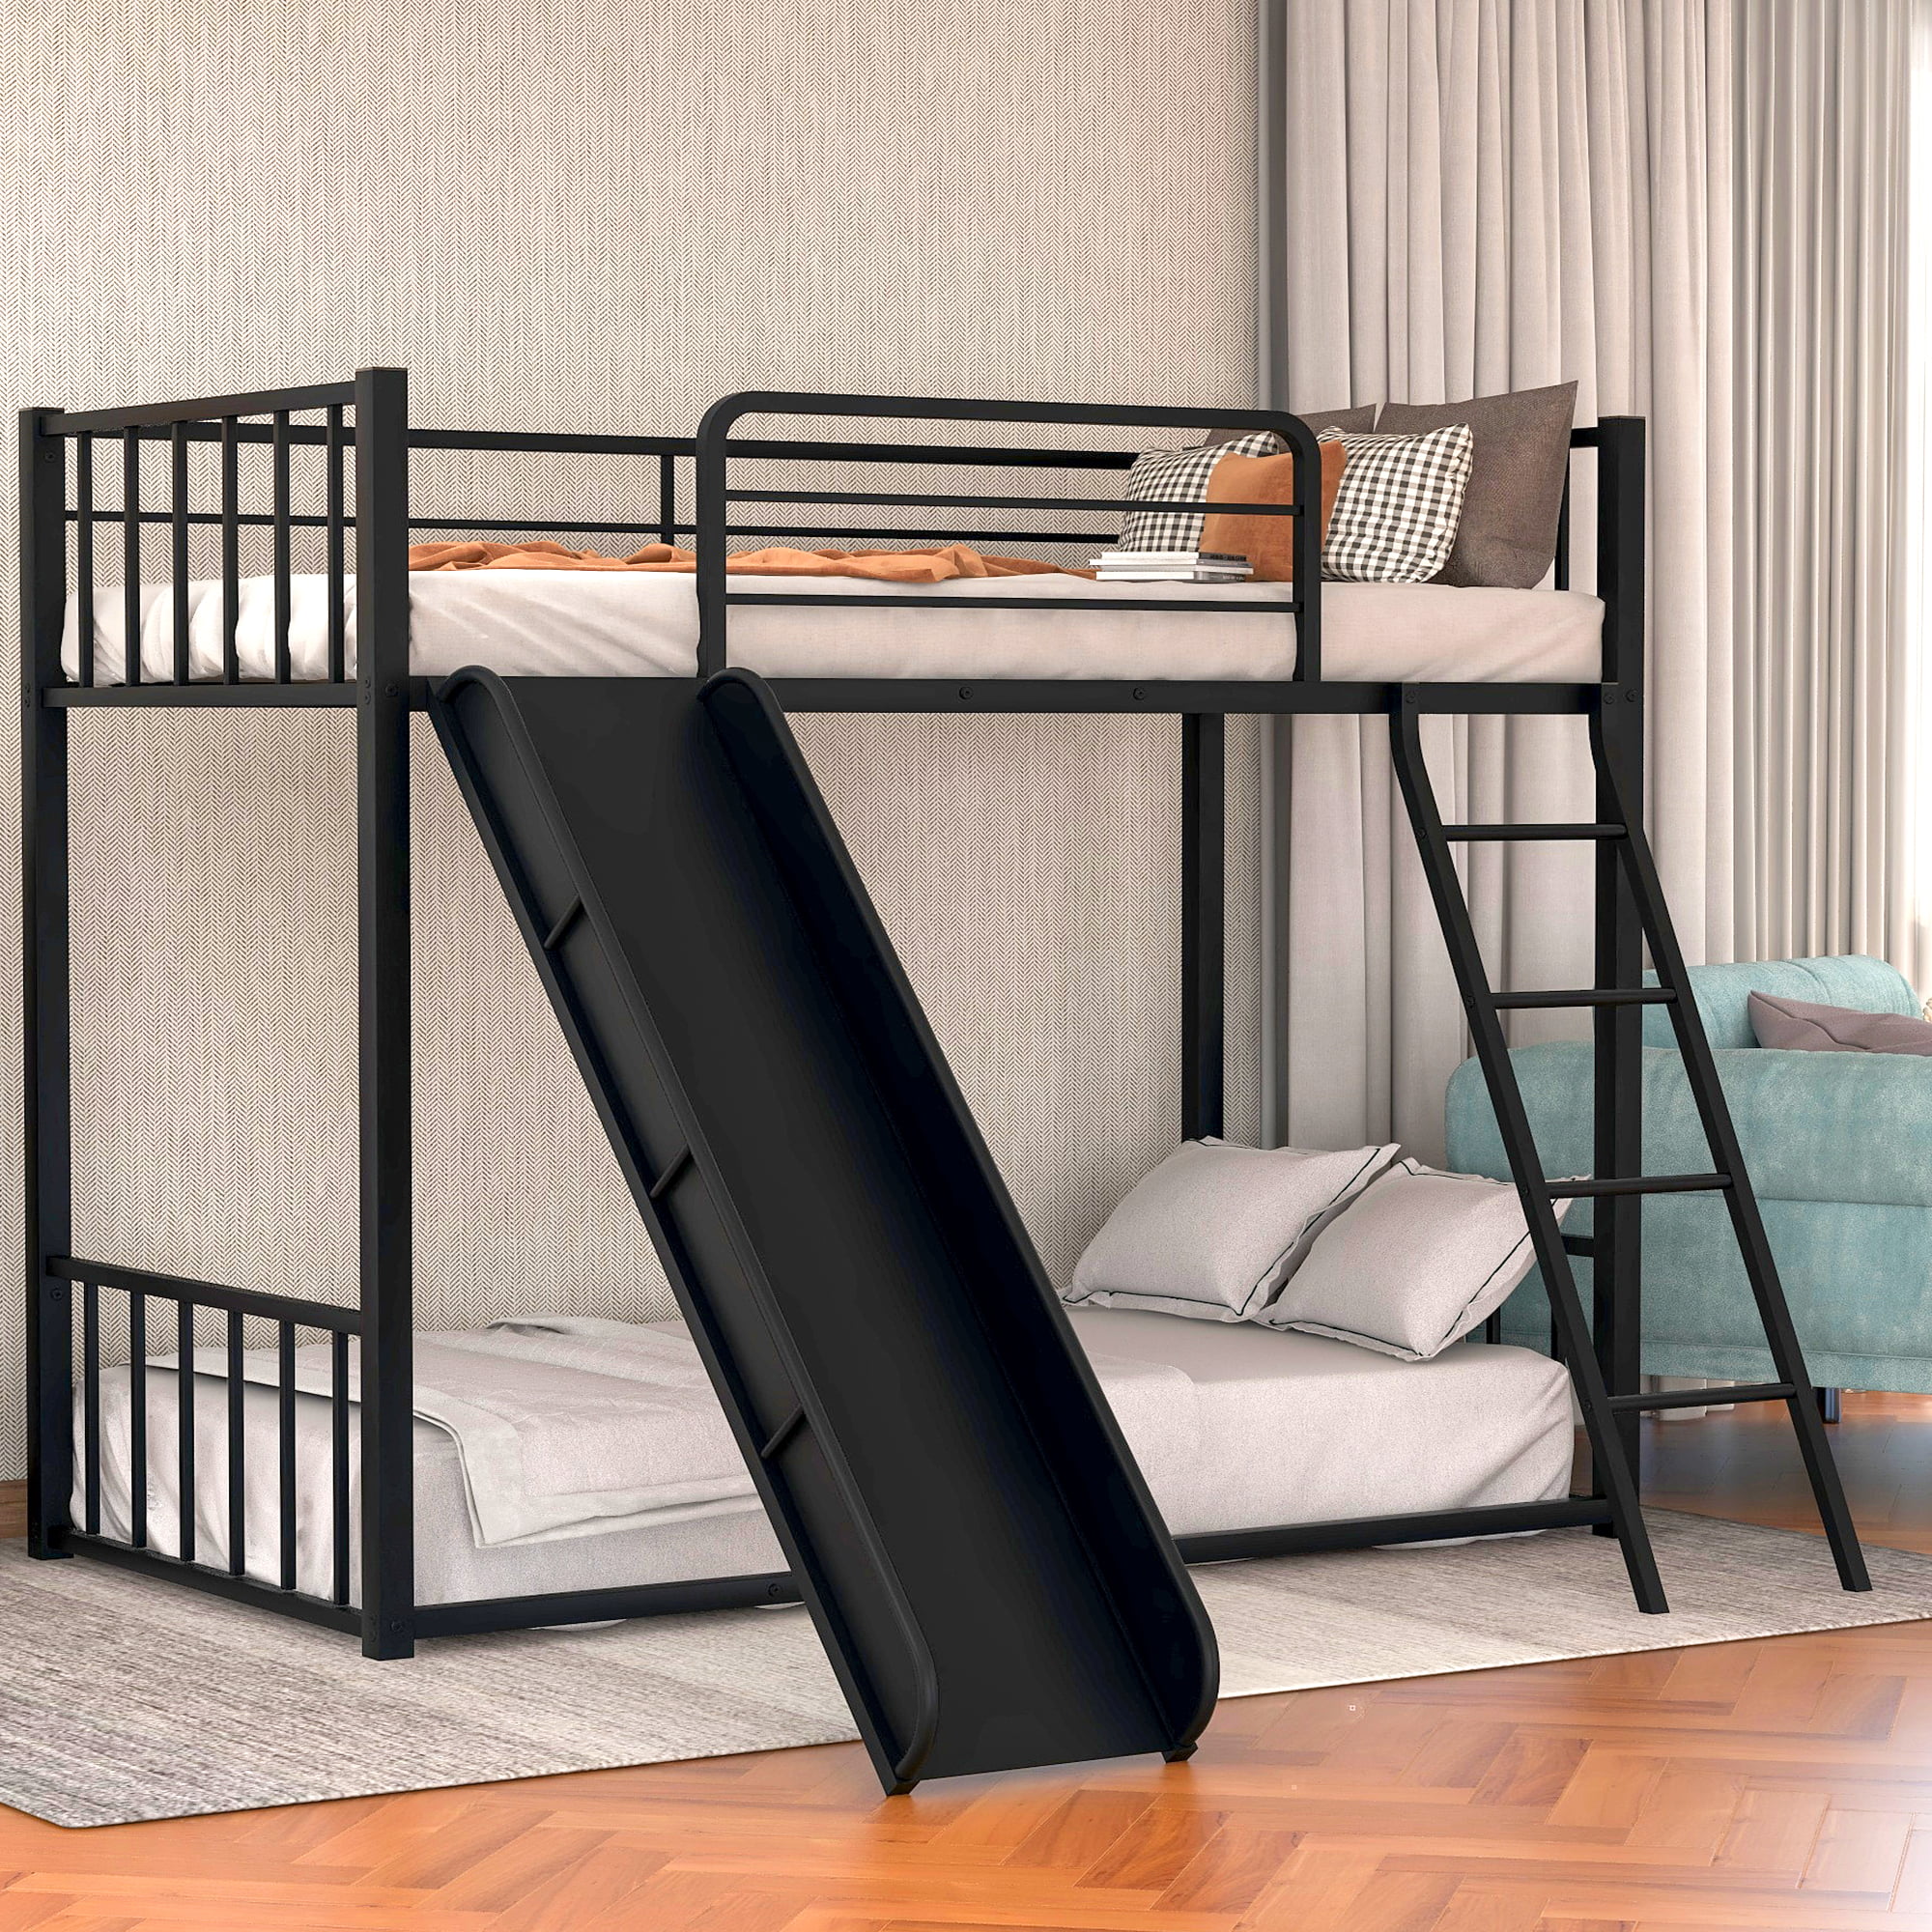 Euroco Metal Bunk Bed Twin Over, Camp Bunk Bed With Slide